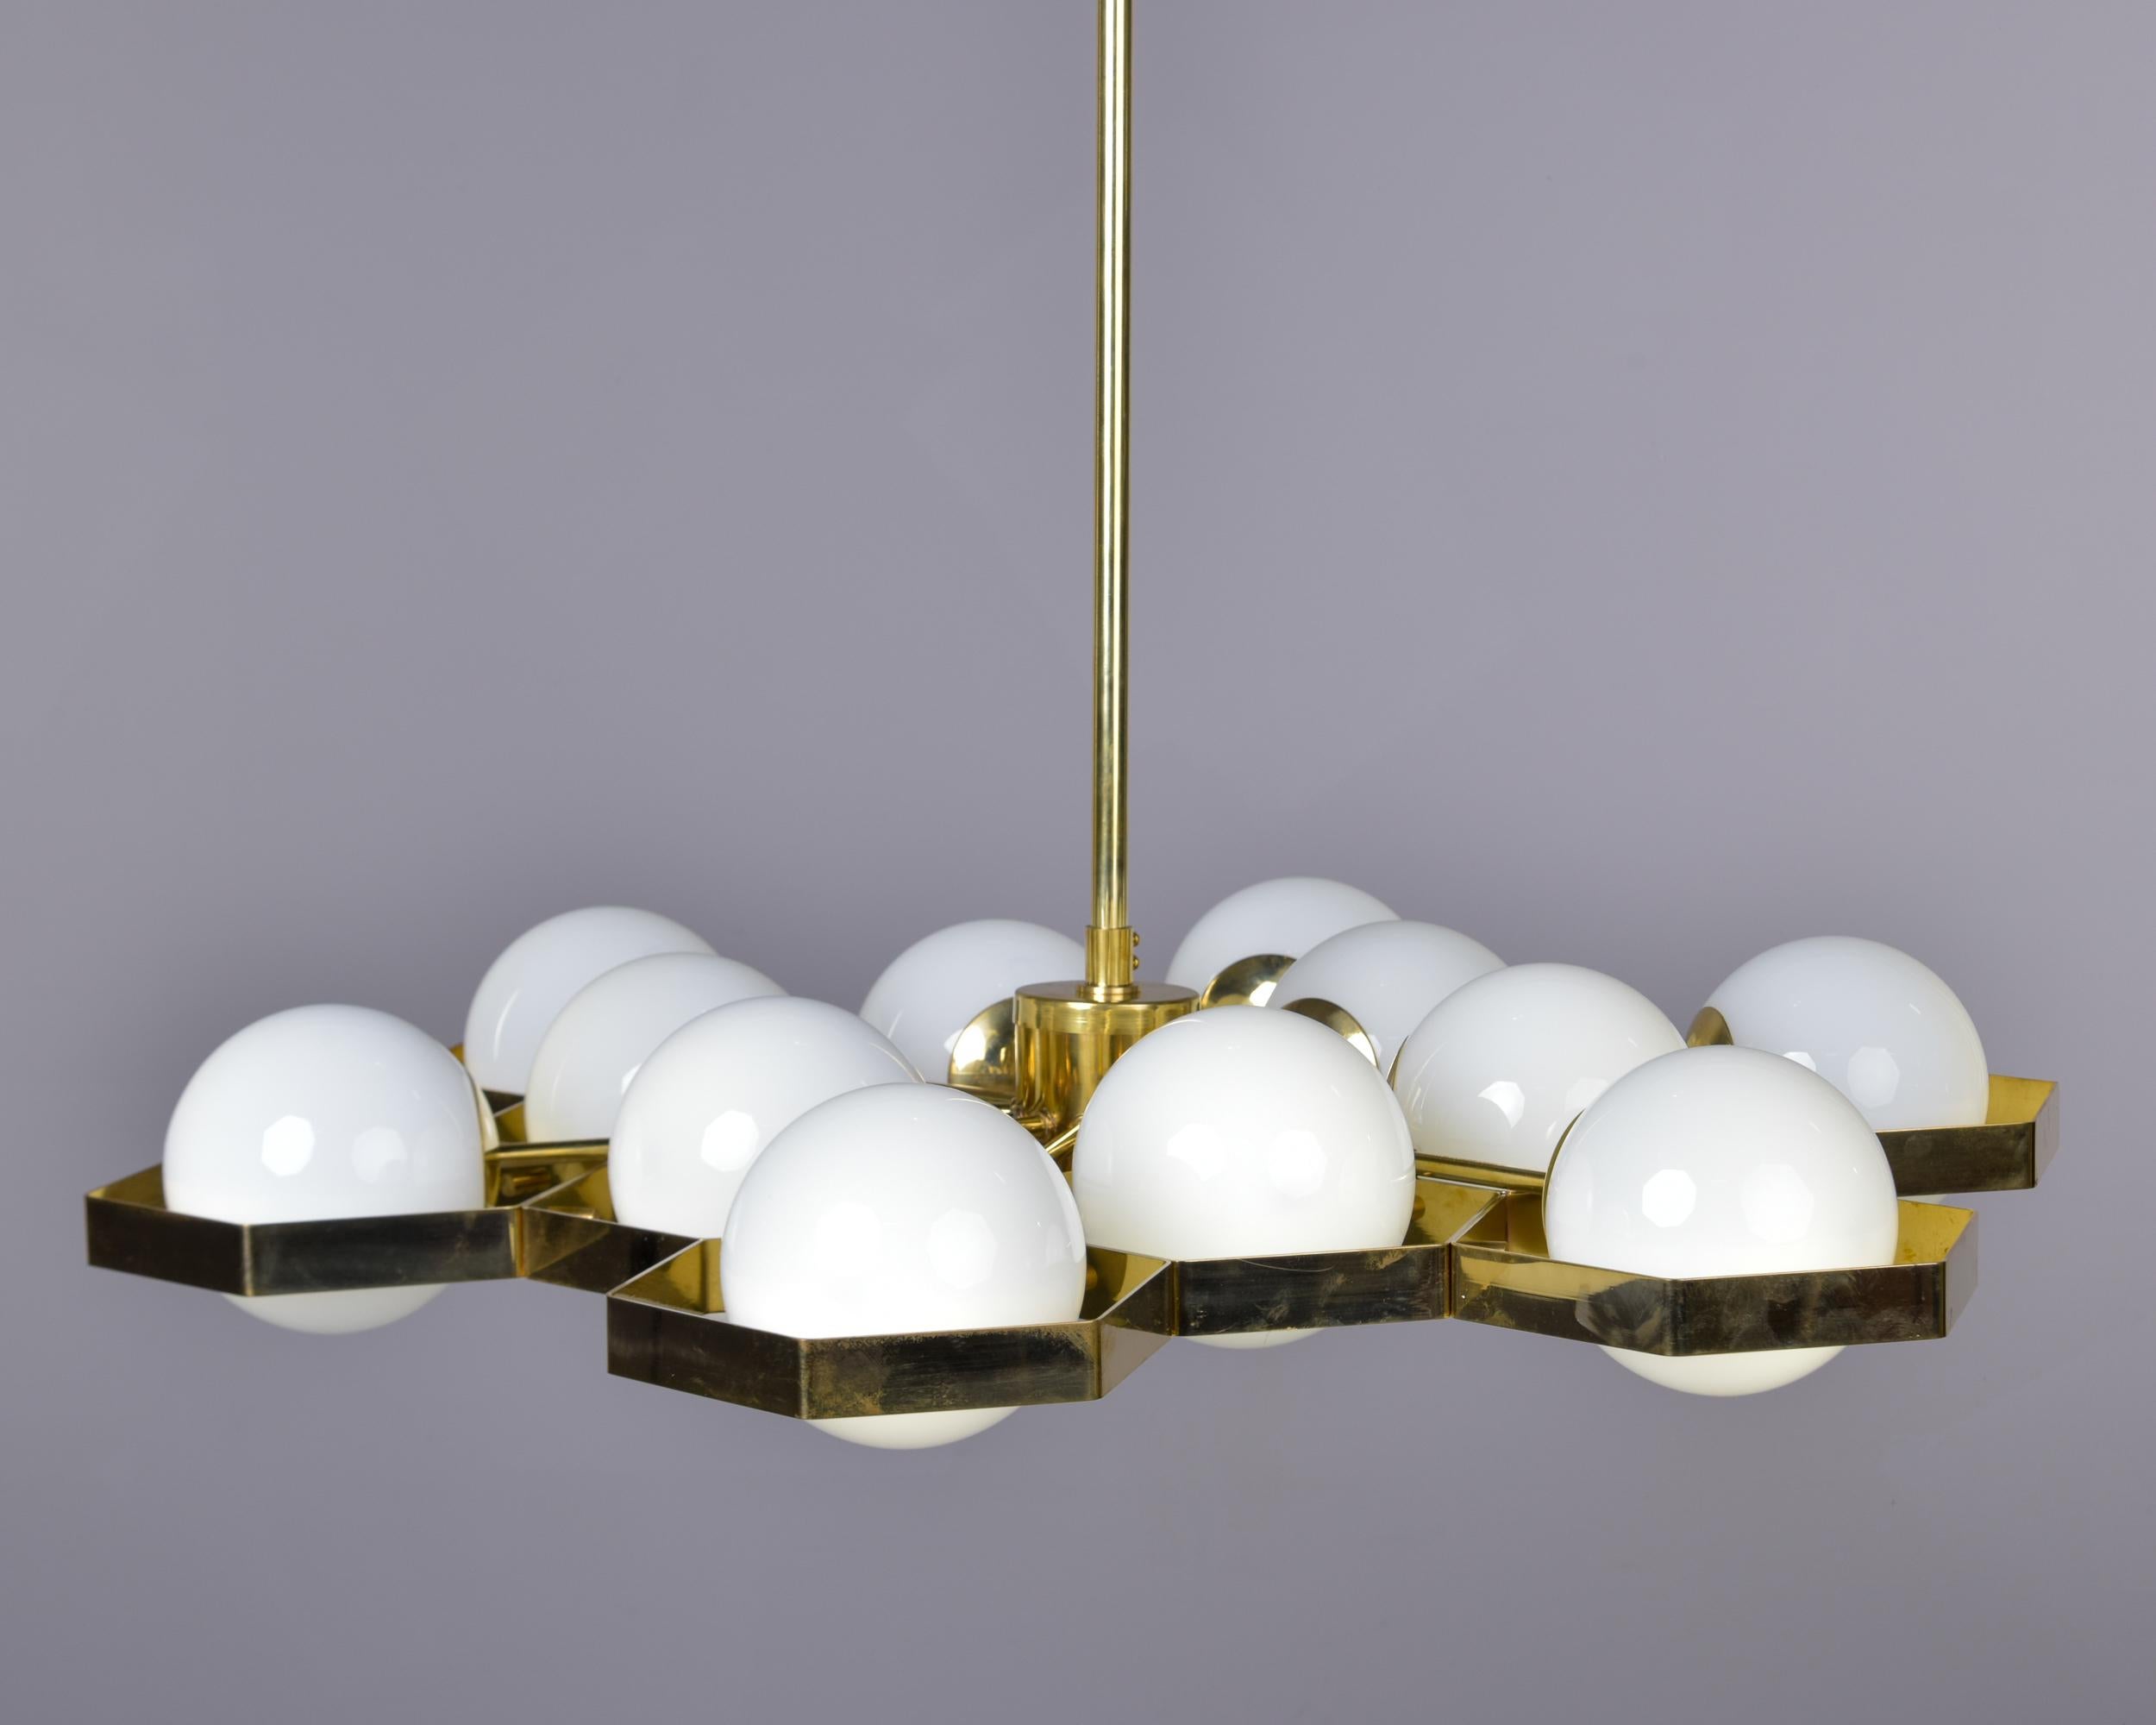 New 12 Light Italian Fixture with Honeycomb Brass Frame and White Globes  3